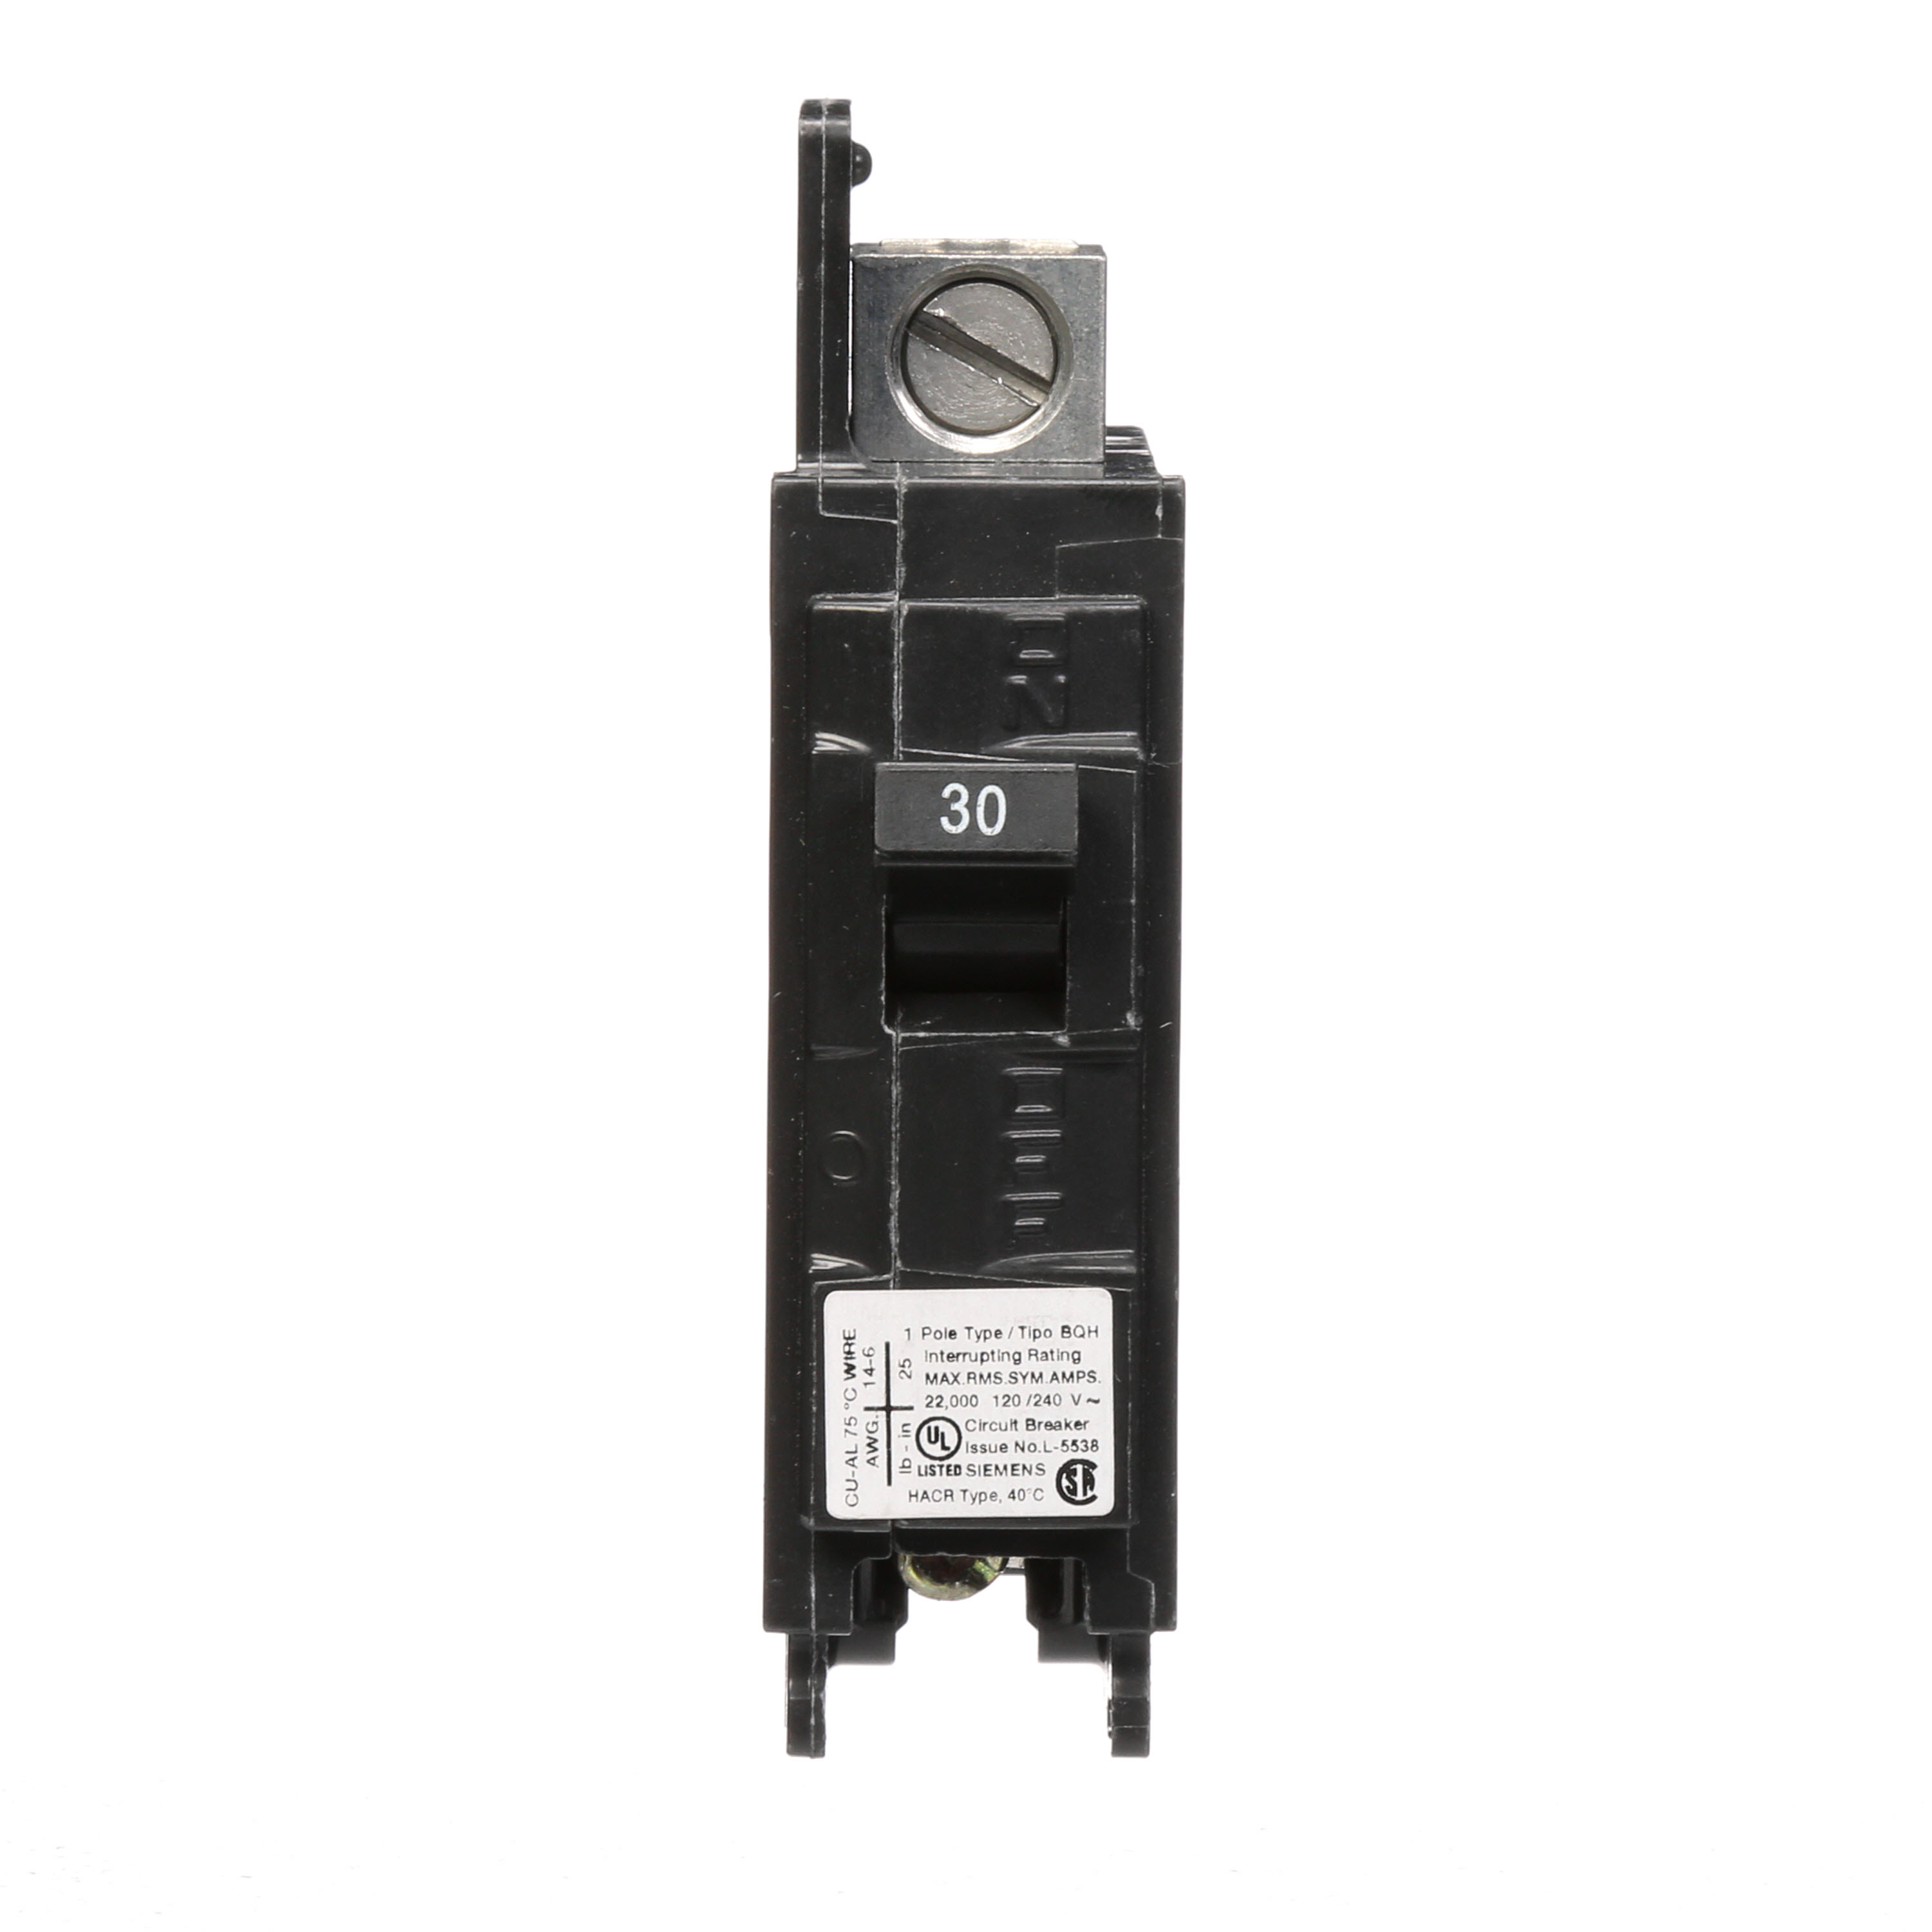 Siemens Low Voltage Molded Case Circuit Breakers General Purpose MCCBs are Circuit Protection Molded Case Circuit Breakers. 1-Pole circuit breaker type BQH. Rated 120V (030A) (AIR 22 kA). Special features Load side lugs are included.